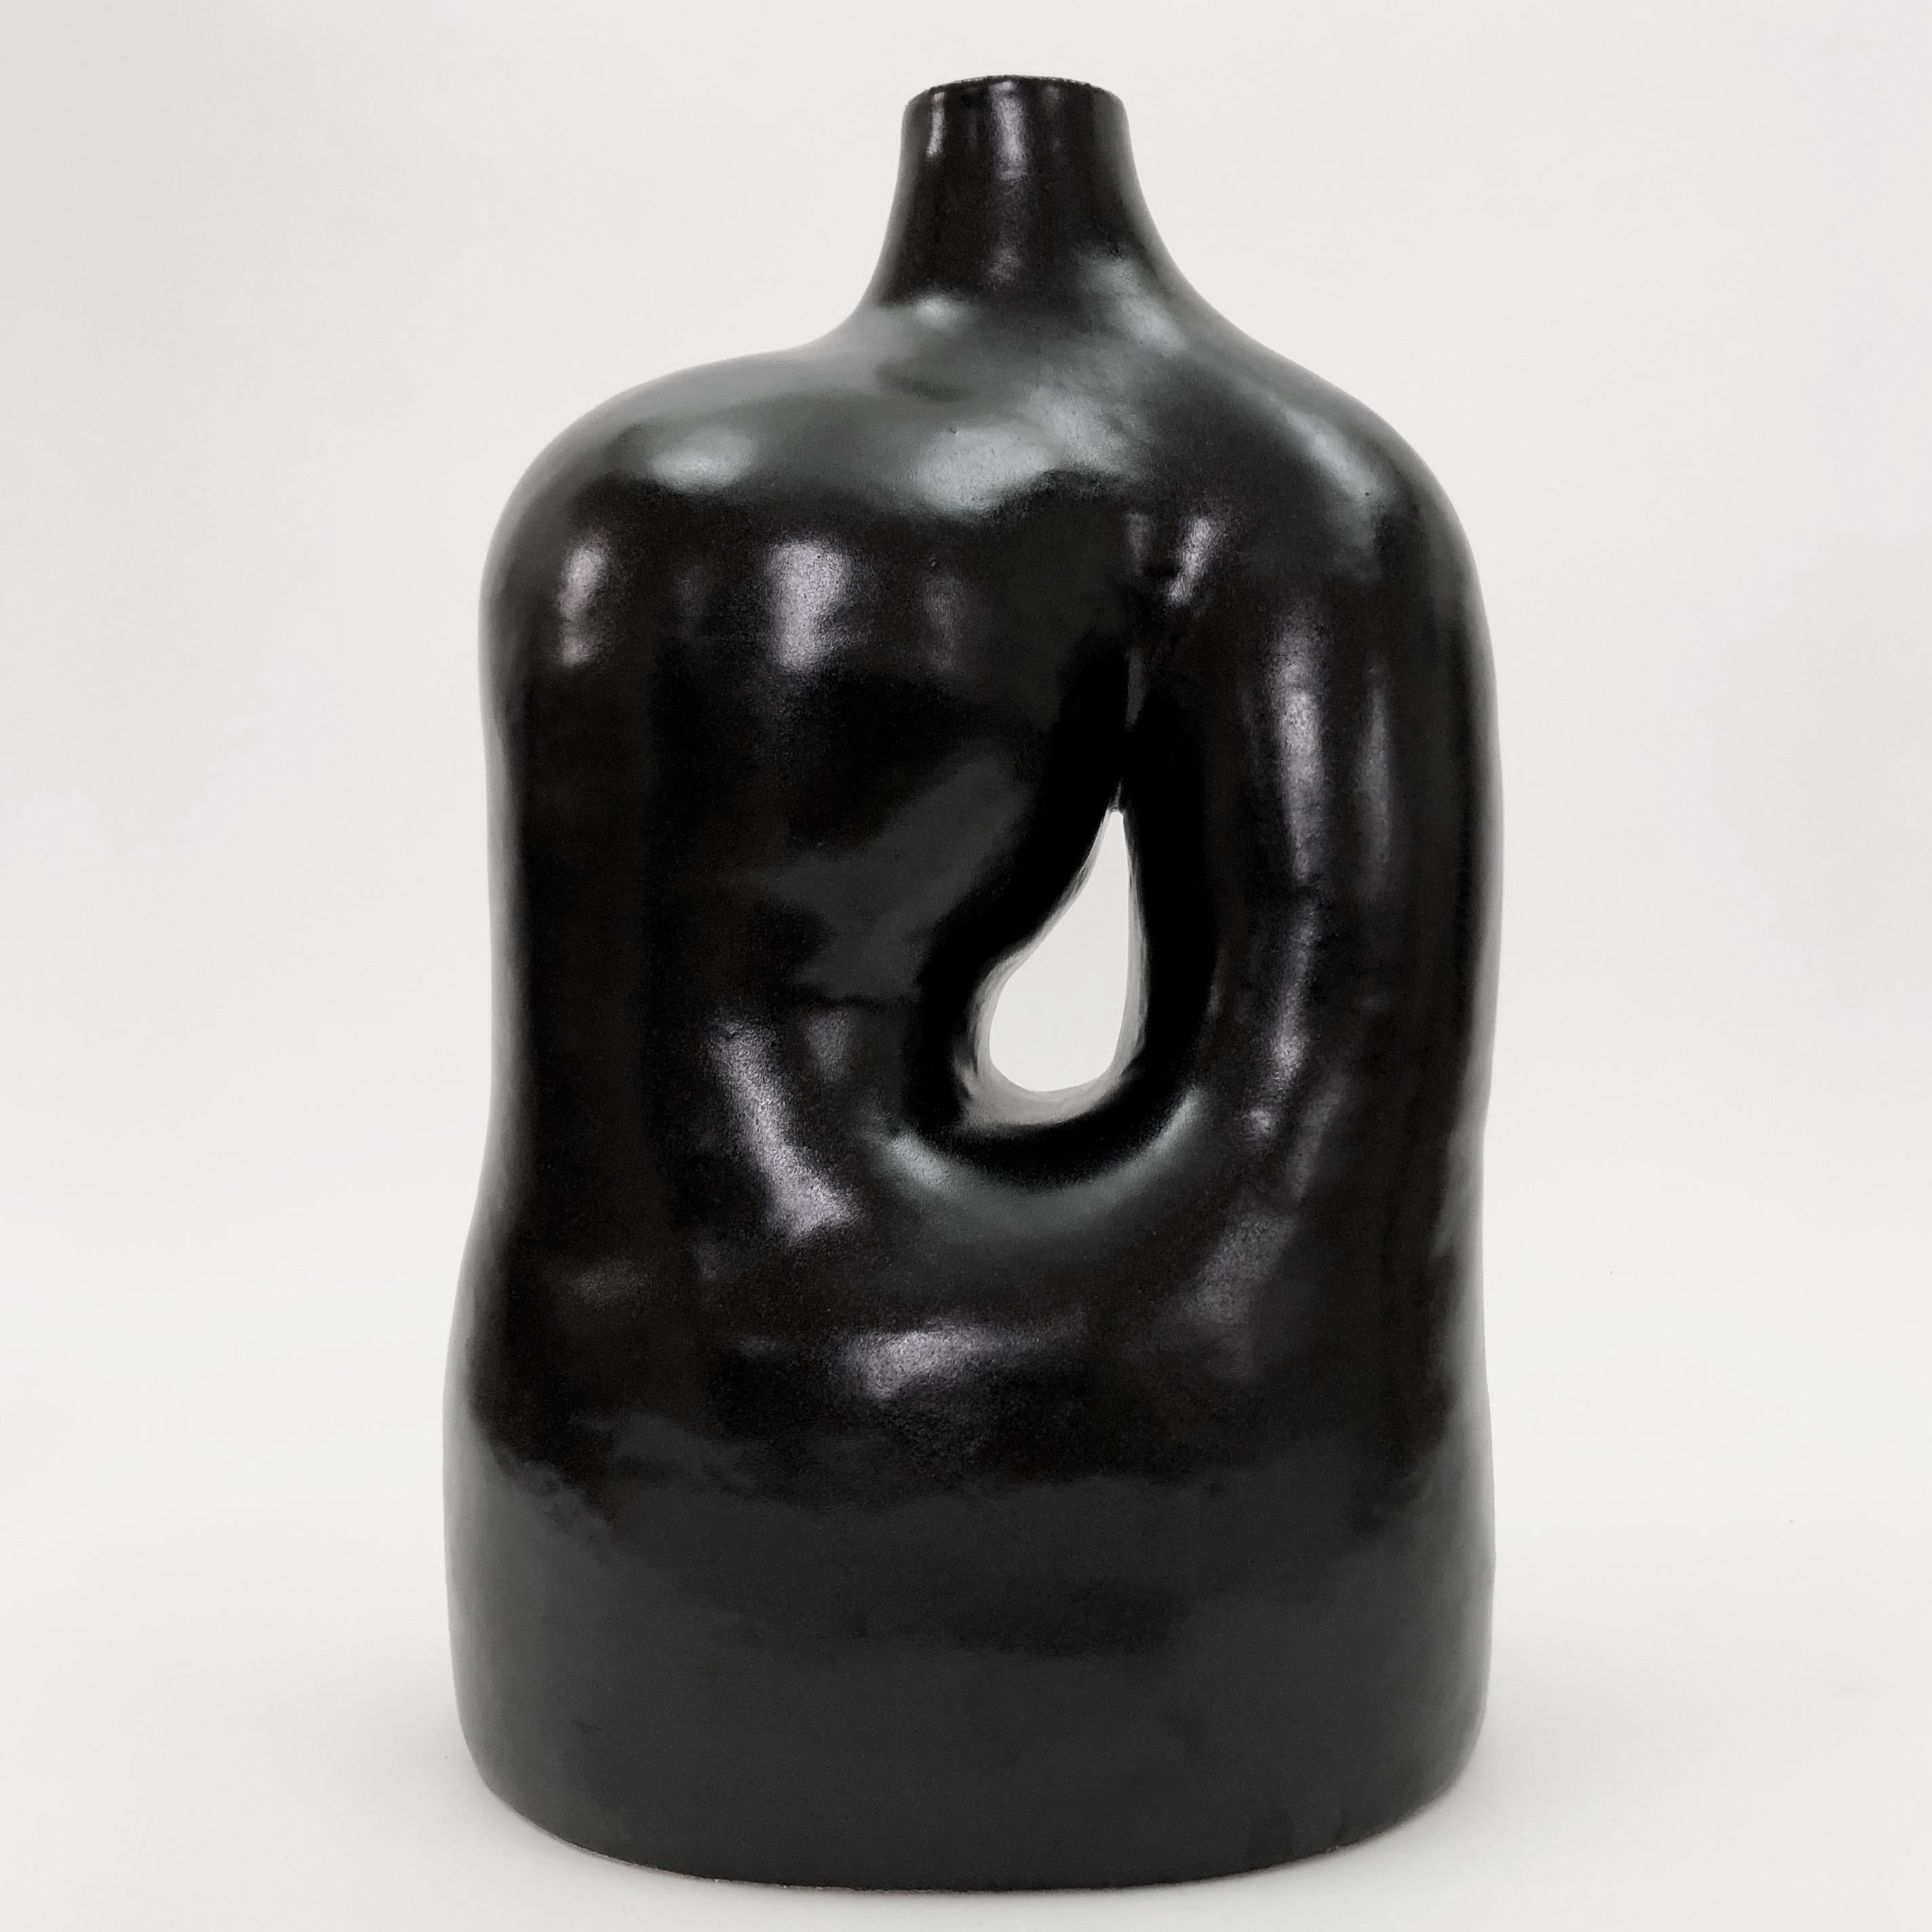 Large sculpture piece, forming table lamp base, organic shaped. 
Ceramic enameled in deep black. 
One of a kind handmade piece designed and signed by the French artists ceramicists, Dalo. 

Dimensions:
The Height measurement concerns the ceramic